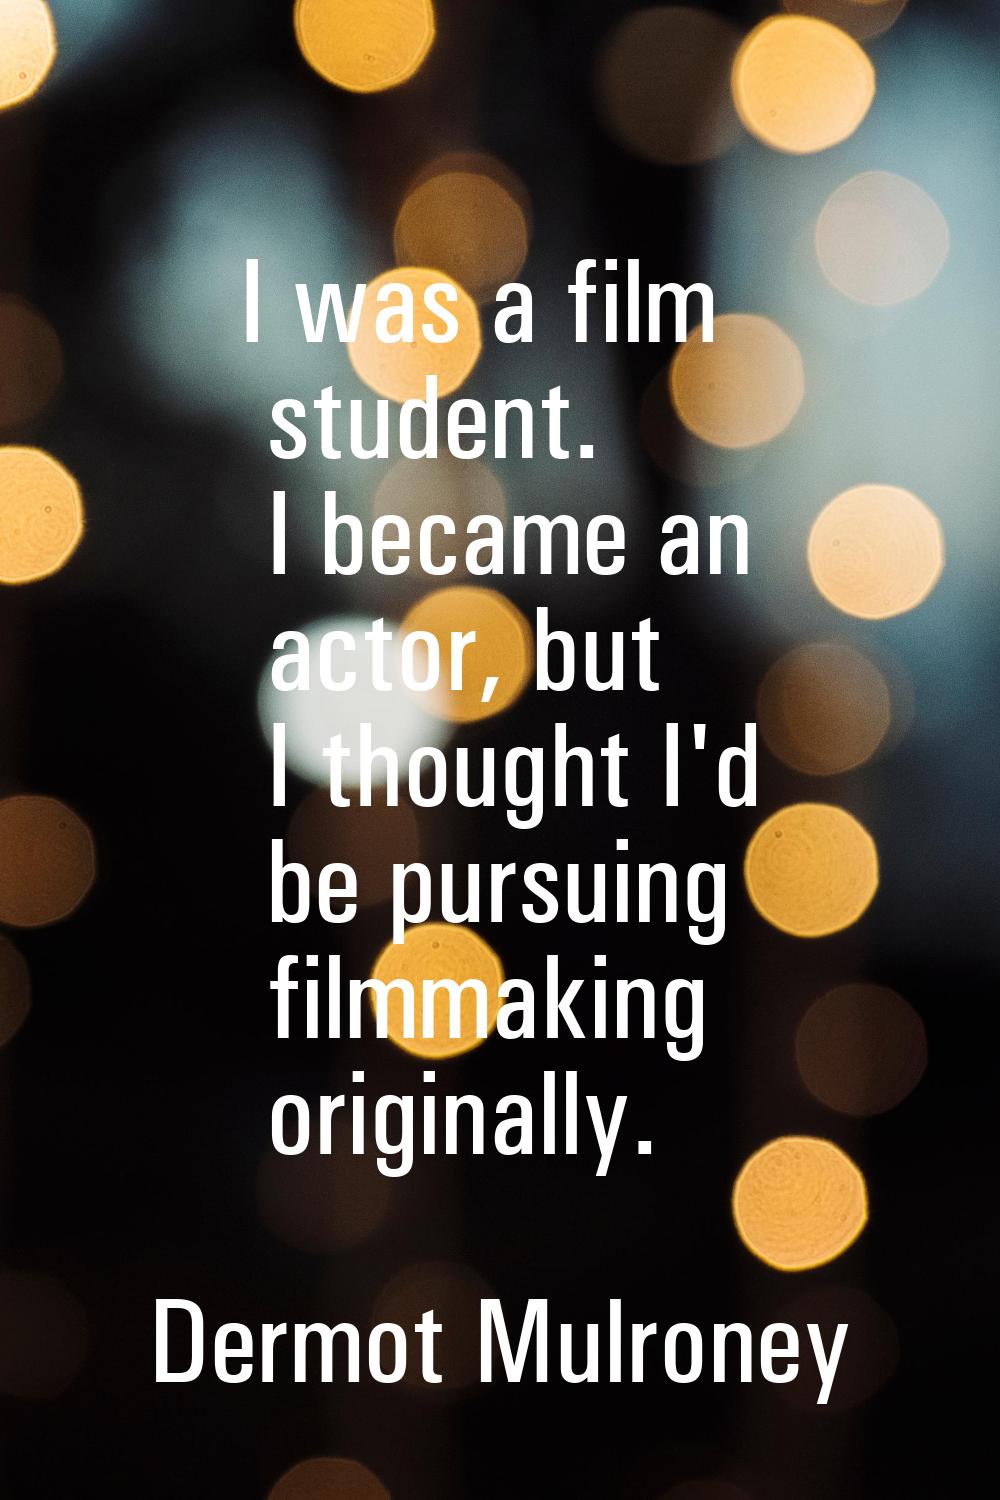 I was a film student. I became an actor, but I thought I'd be pursuing filmmaking originally.